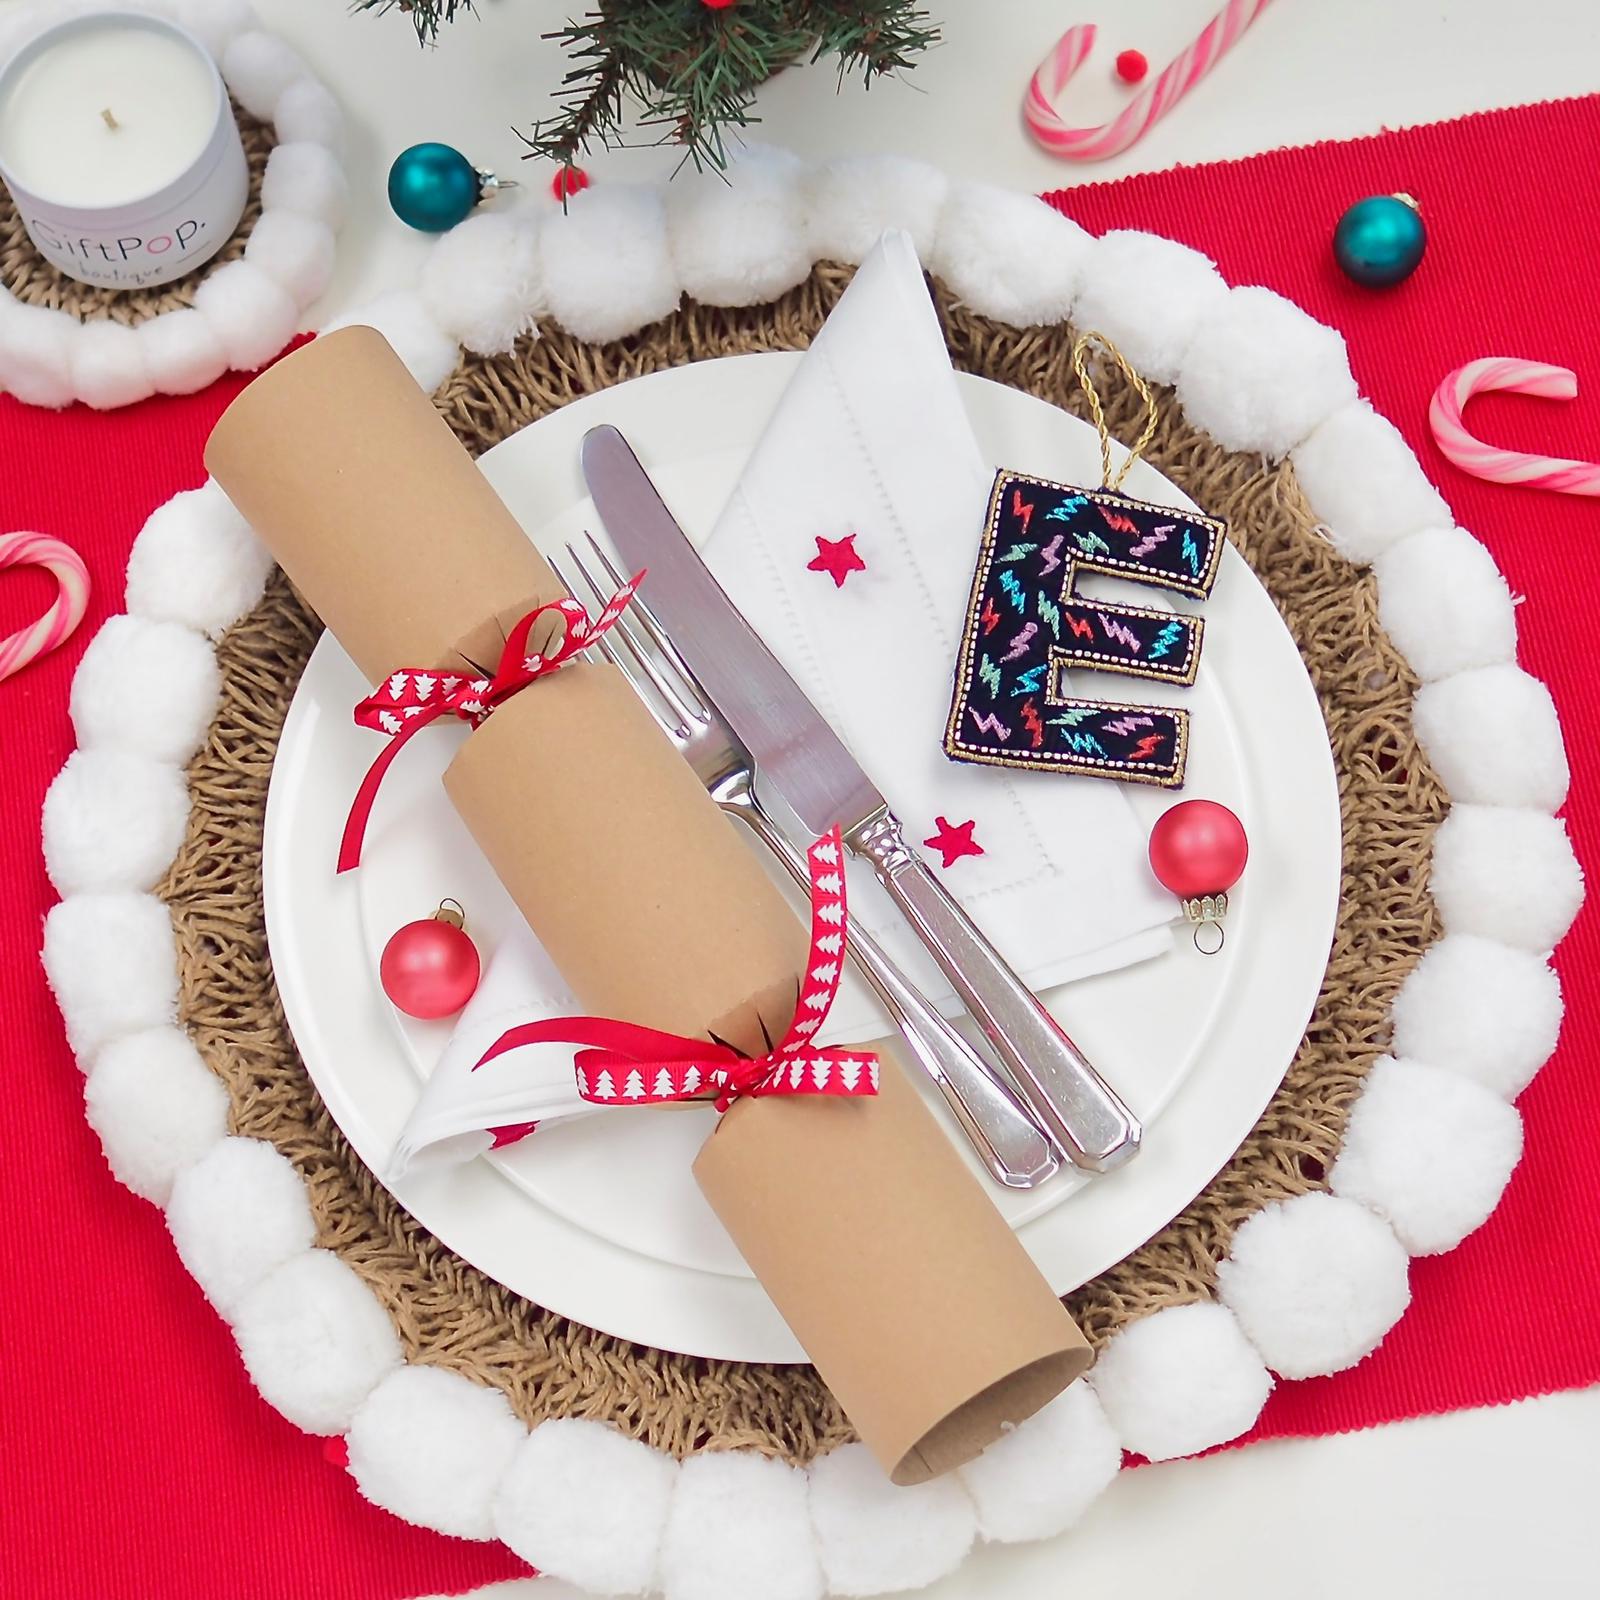 Frenchie Christmas Giveaways – Win a Gift Pop Christmas Home Bundle worth £90